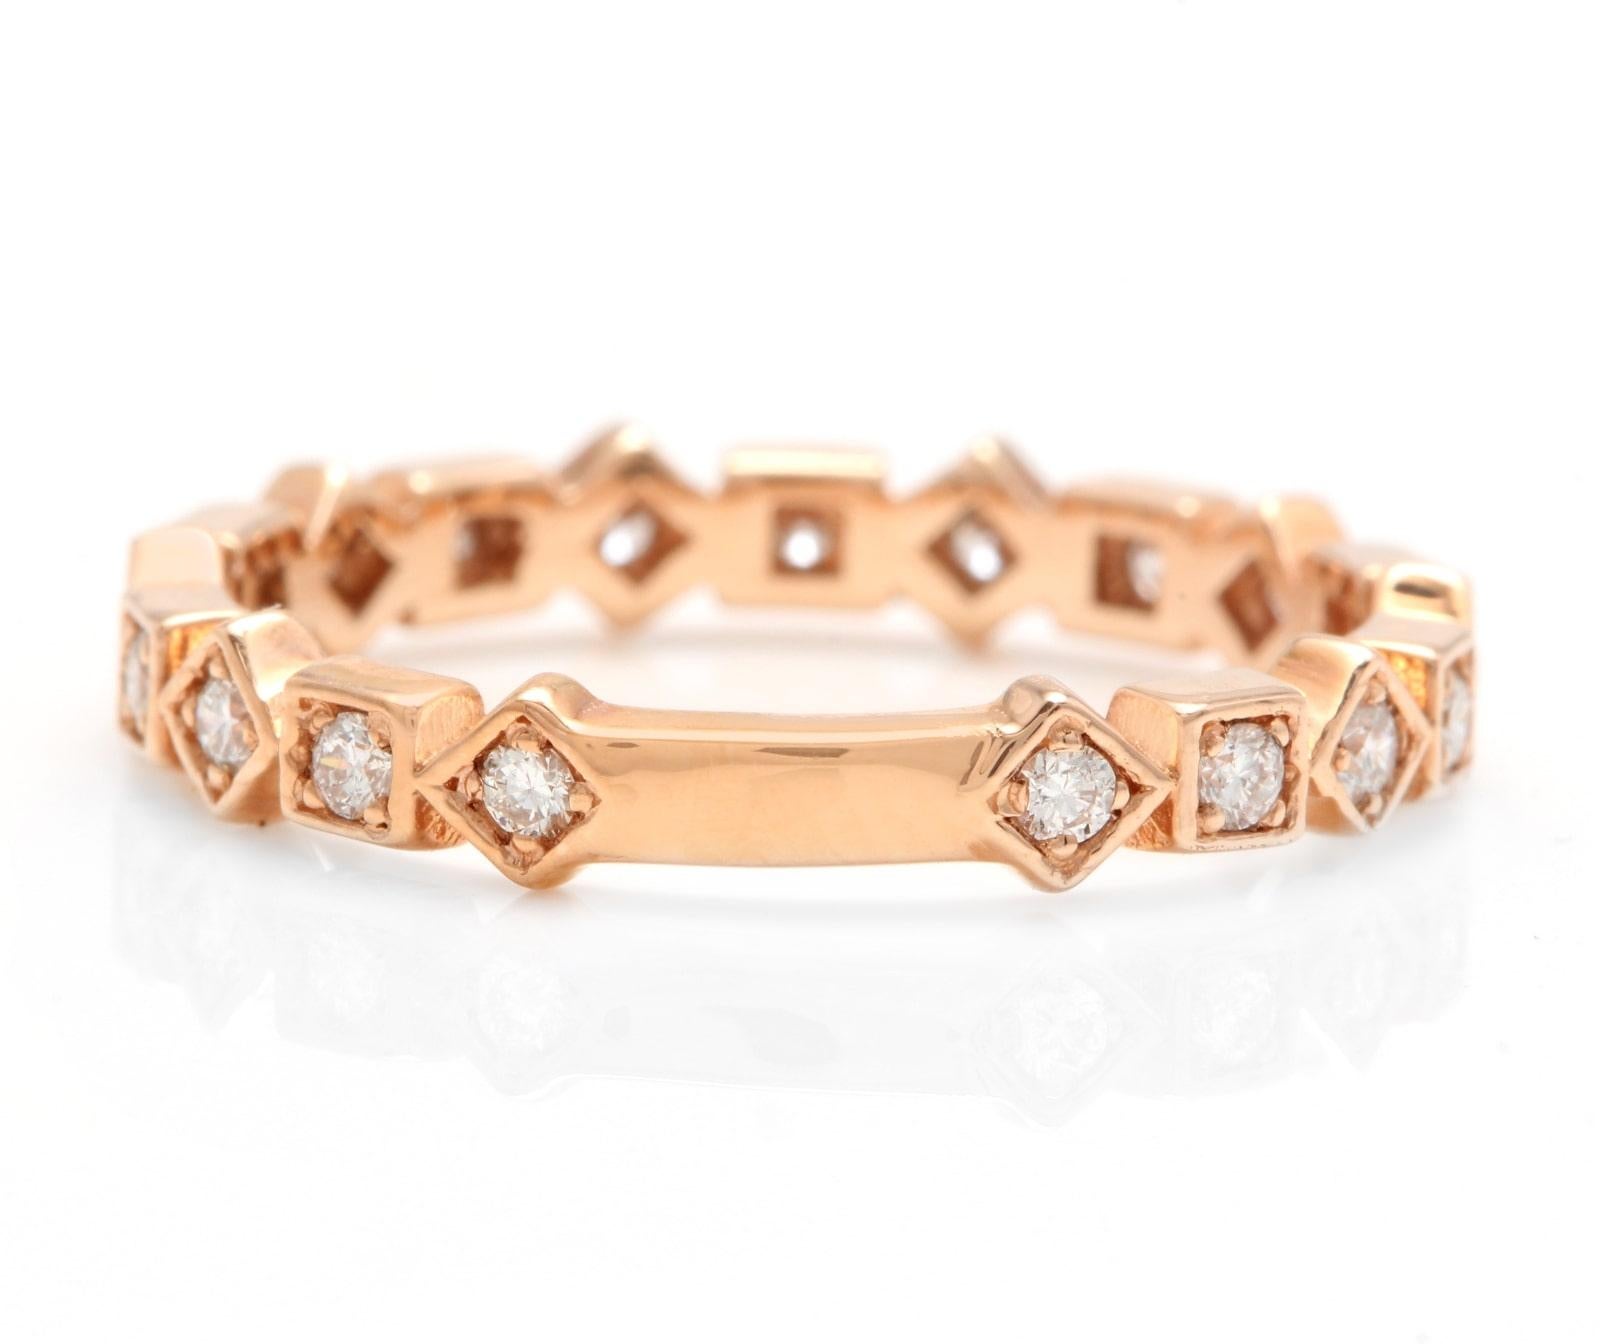 Splendid 0.40 Carats Natural Diamond 14K Solid Rose Gold Ring

Suggested Replacement Value: Approx. $1,500.00

Stamped: 14K

Total Natural Round Cut Diamonds Weight: Approx. 0.40 Carats (color G-H / Clarity SI1-SI2)

The width of the ring is: